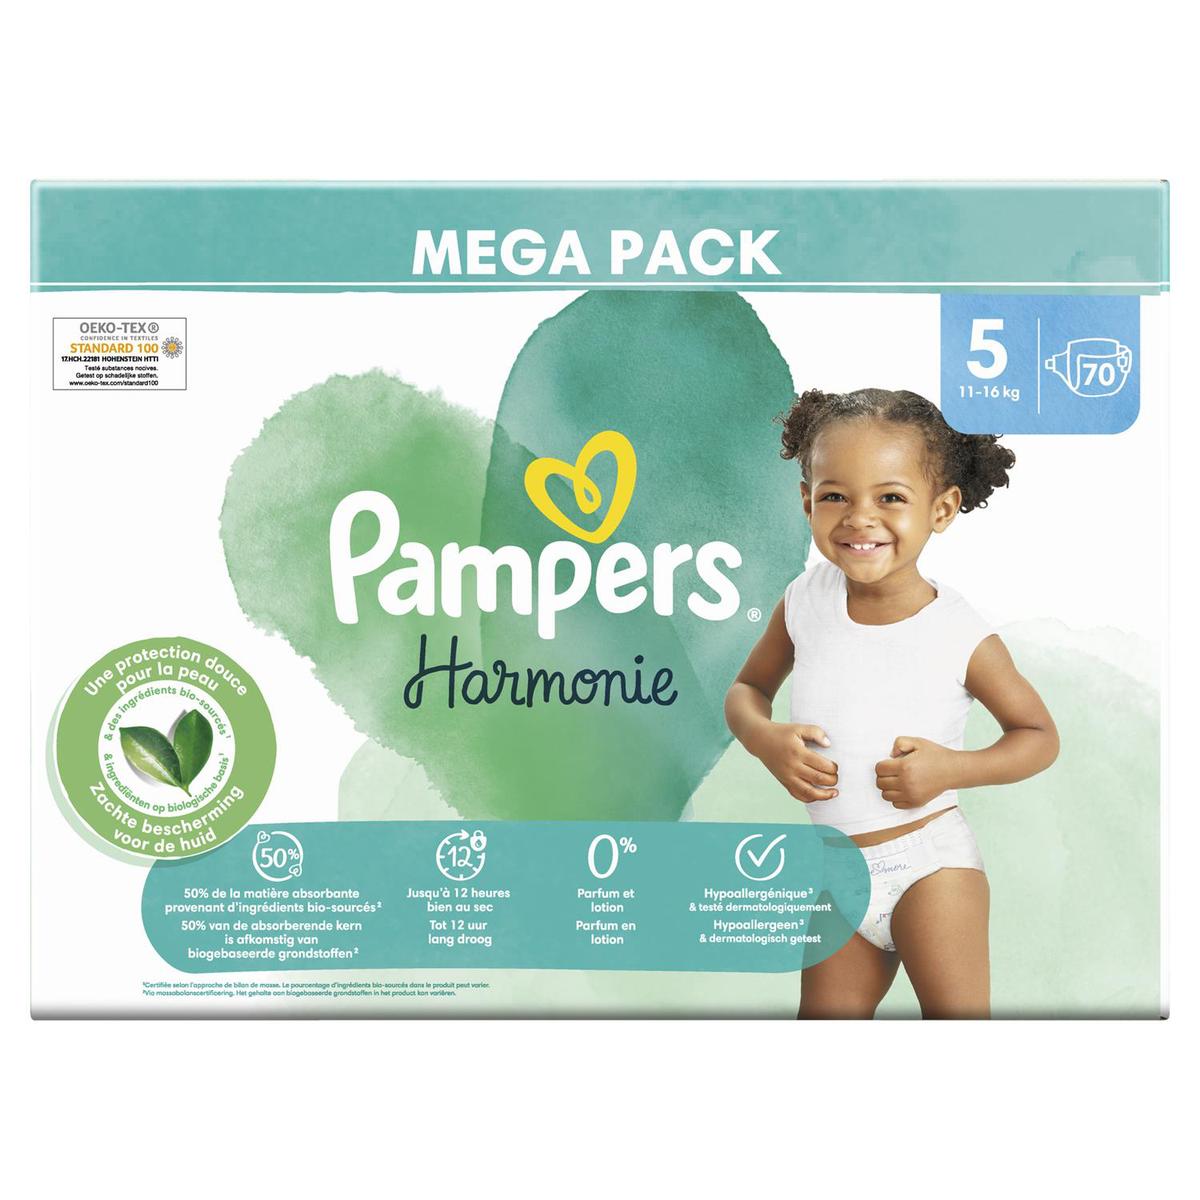 Achat / Vente Promotion Pampers Harmonie Couche T2 4 - 8kg, 48 couches